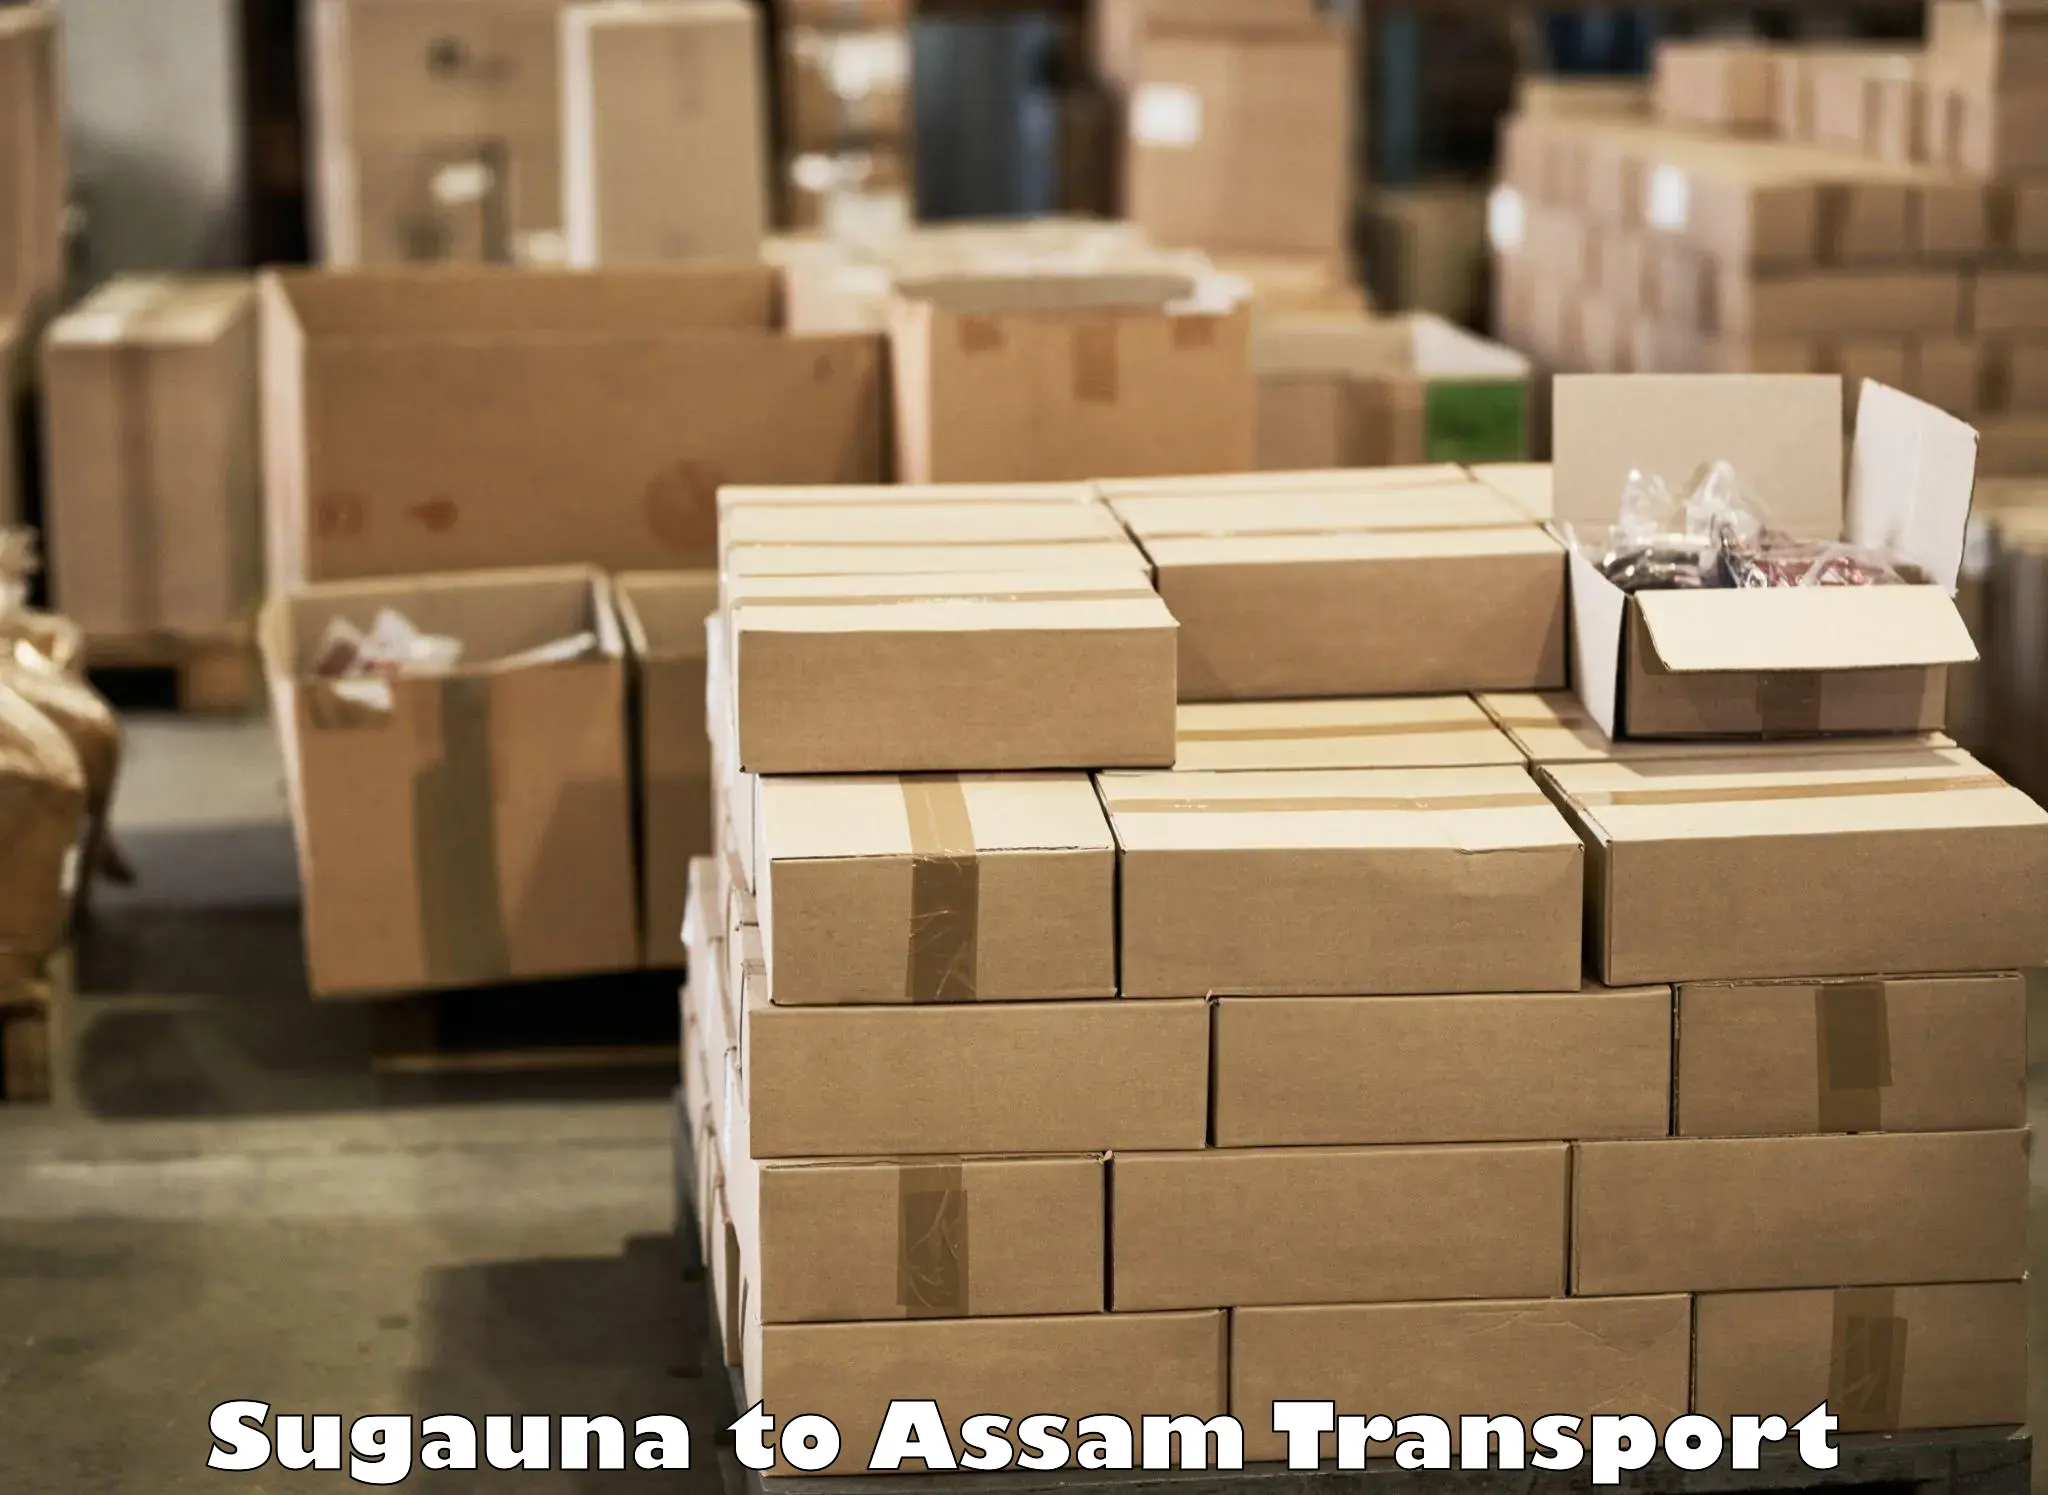 Container transport service Sugauna to Mayang